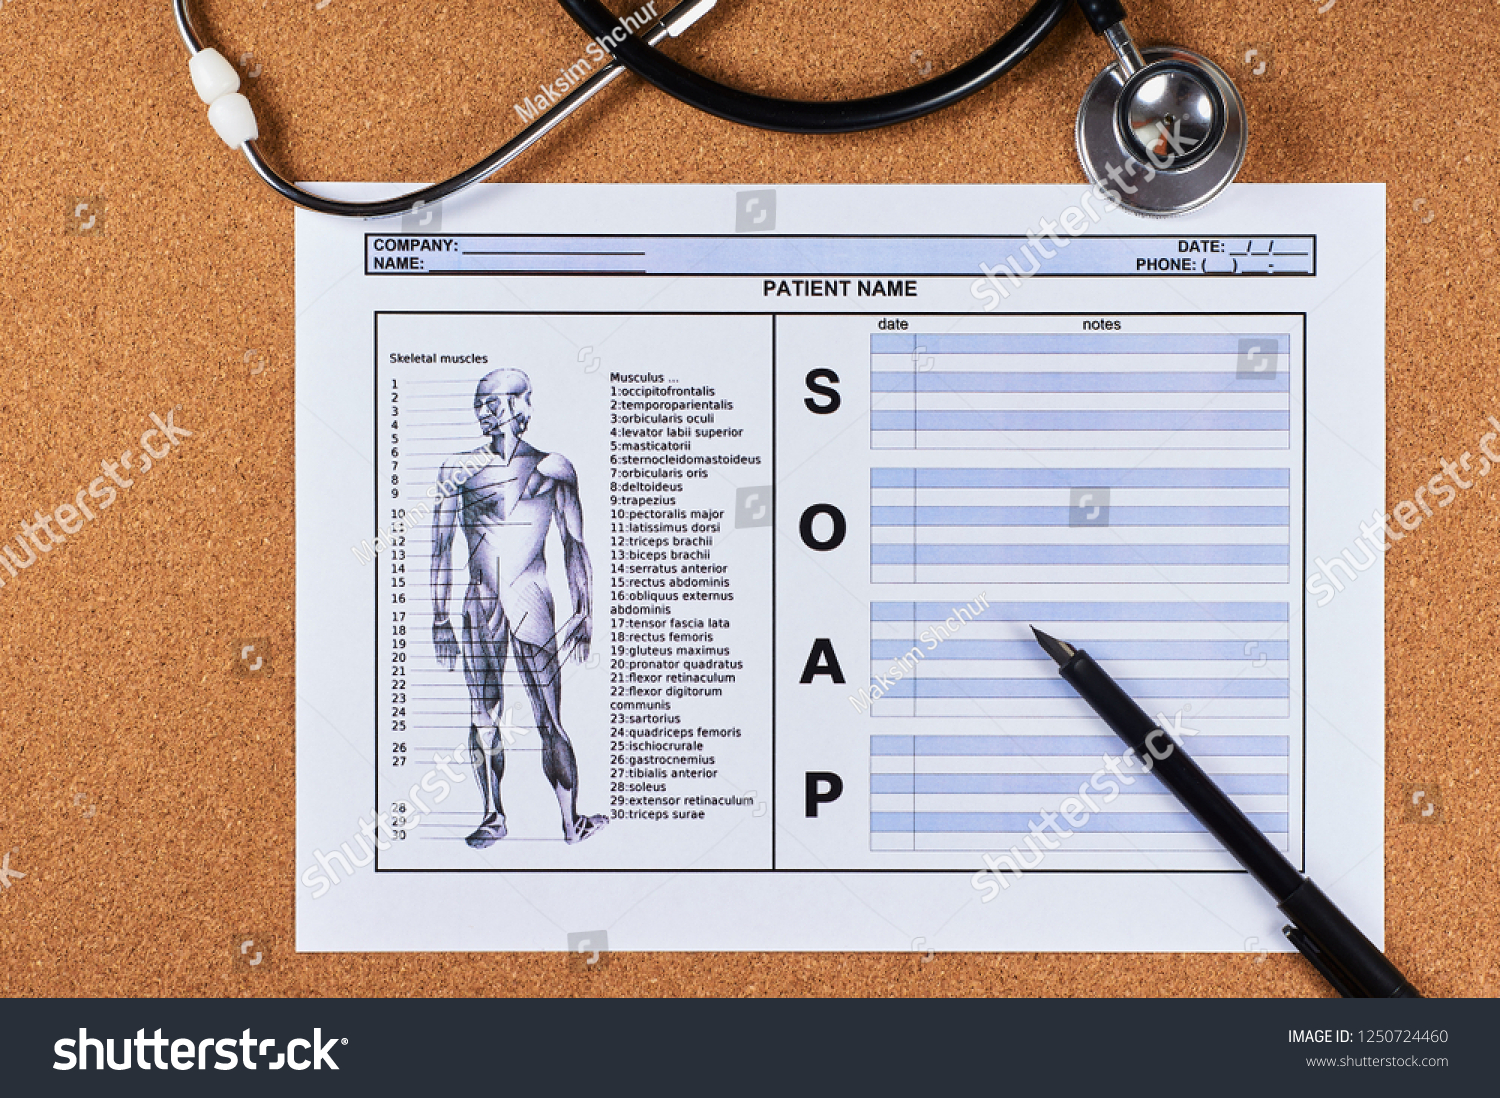 Patient SOAP note sheet, stethoscope and pen on corkwood background. Flat lay. #1250724460